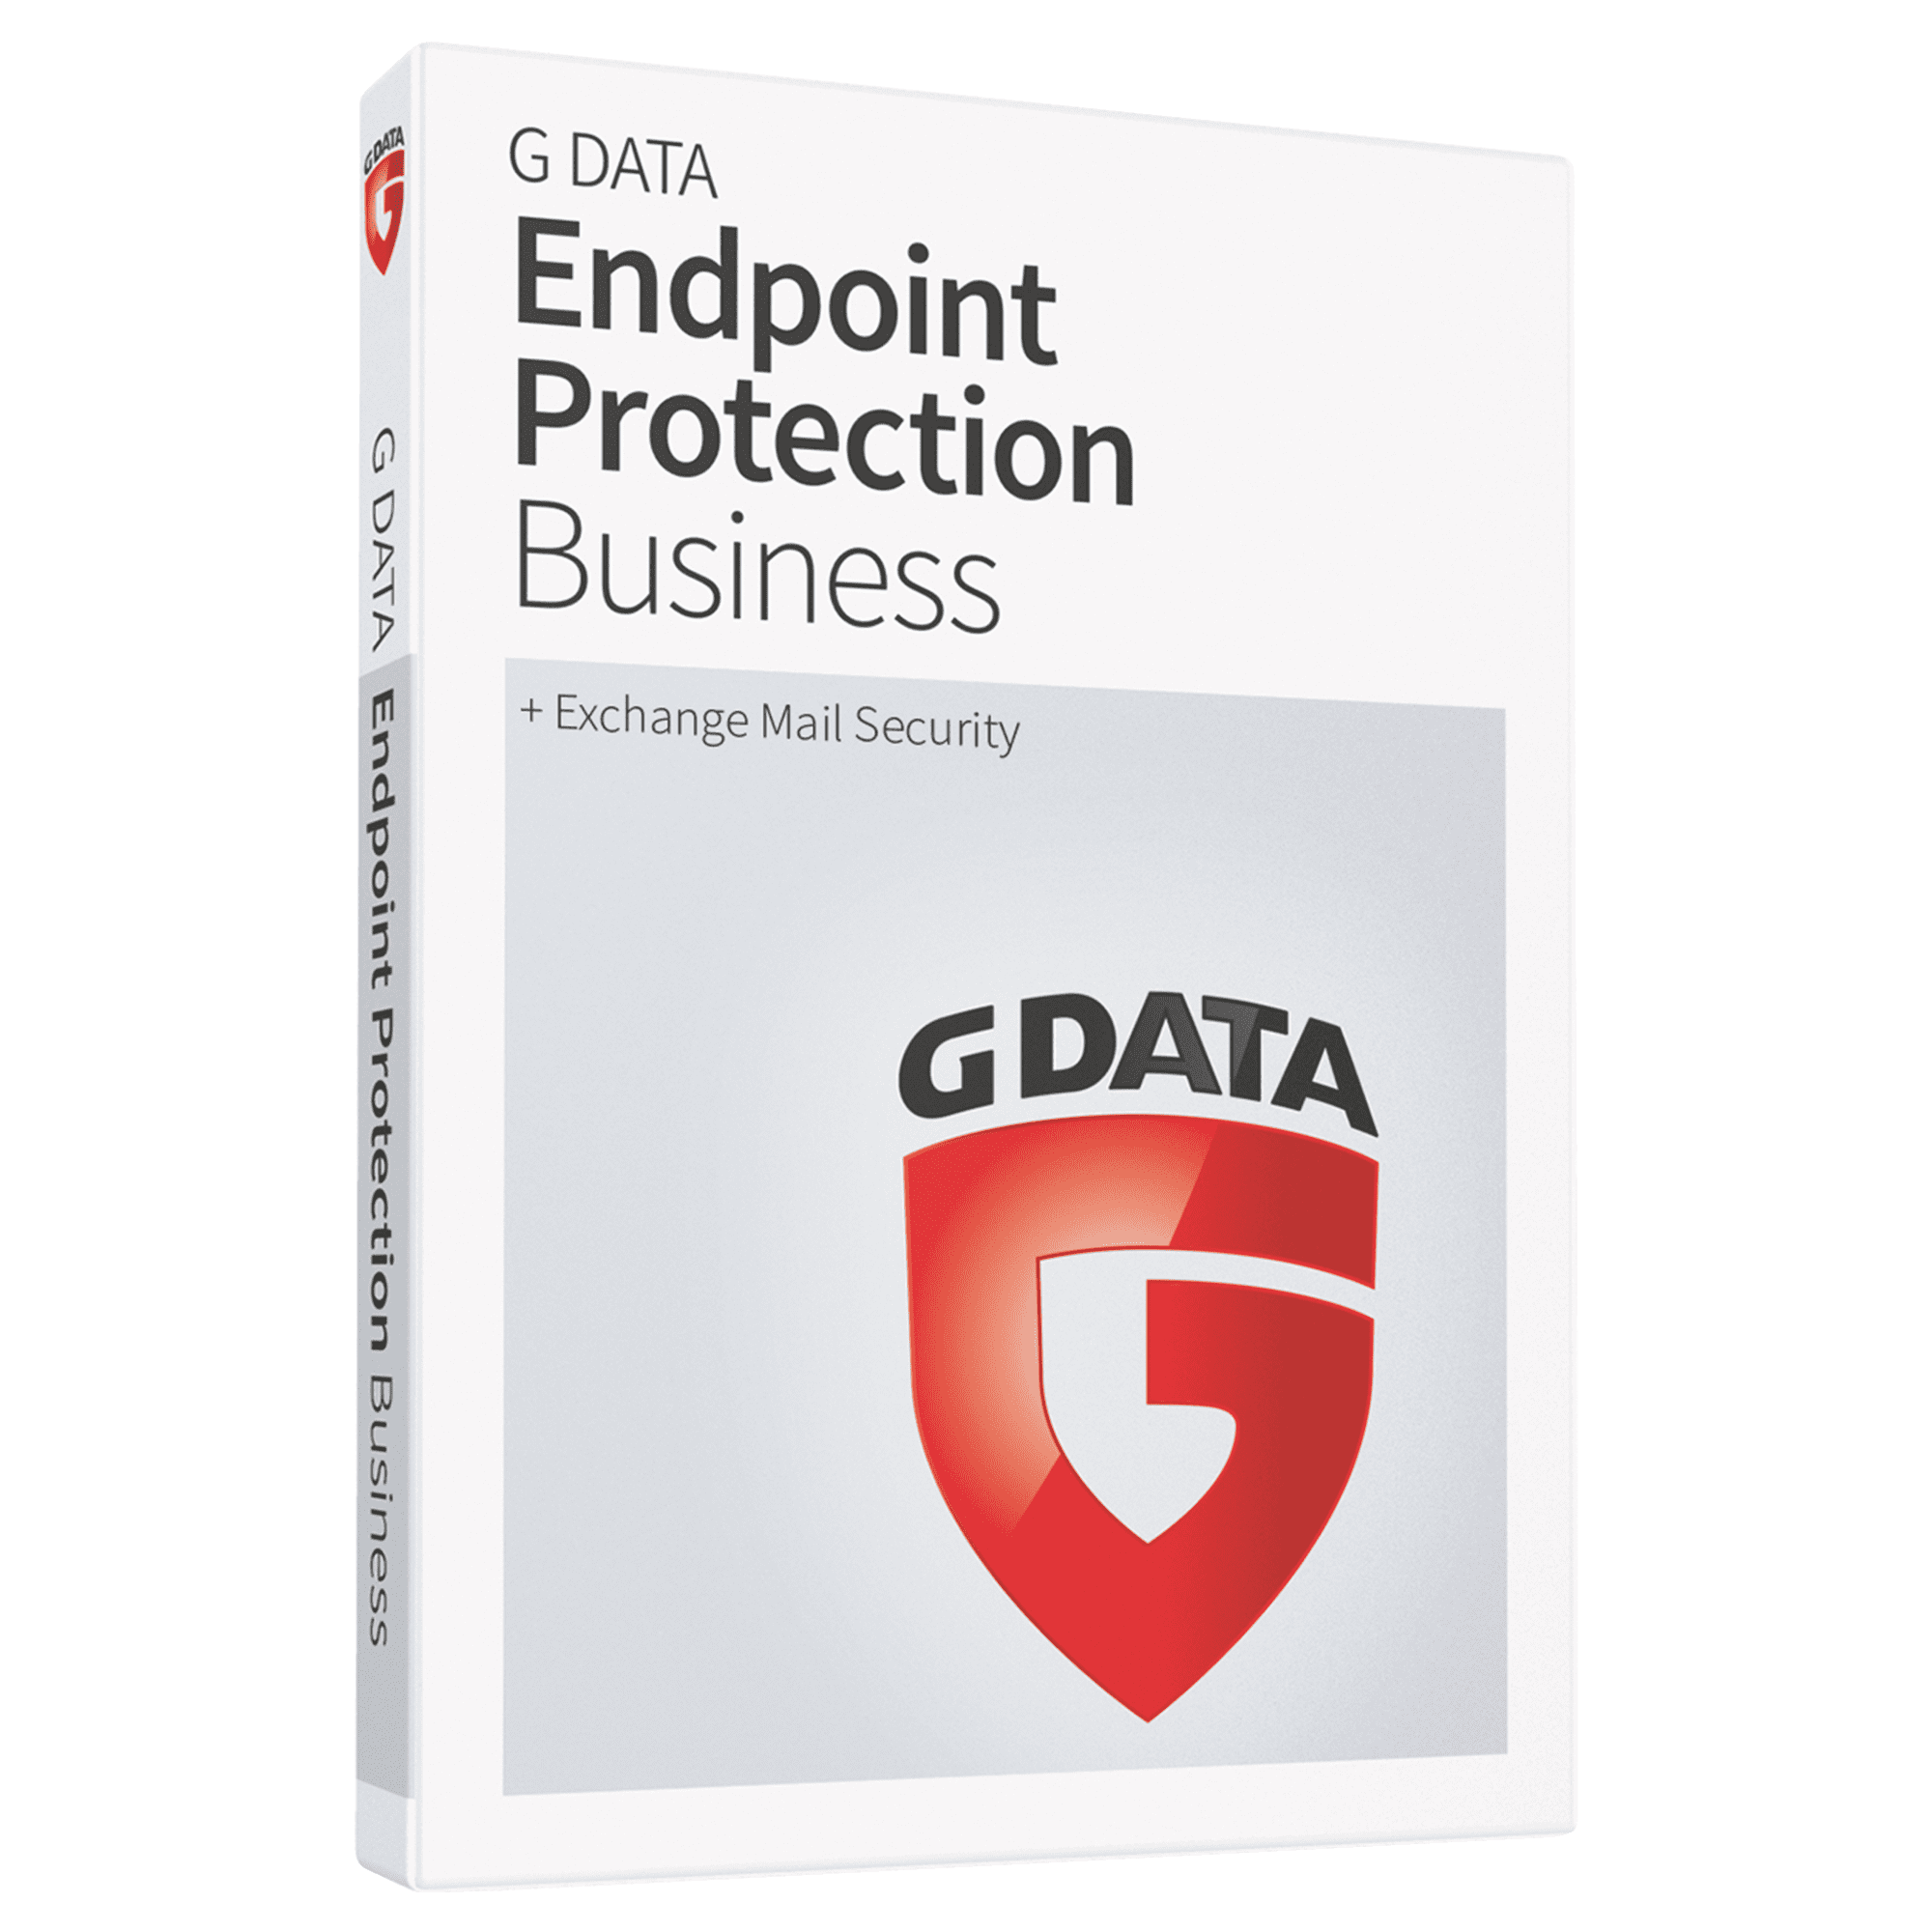 G Data Endpoint Protection Business (+ Exchange Mail Security)